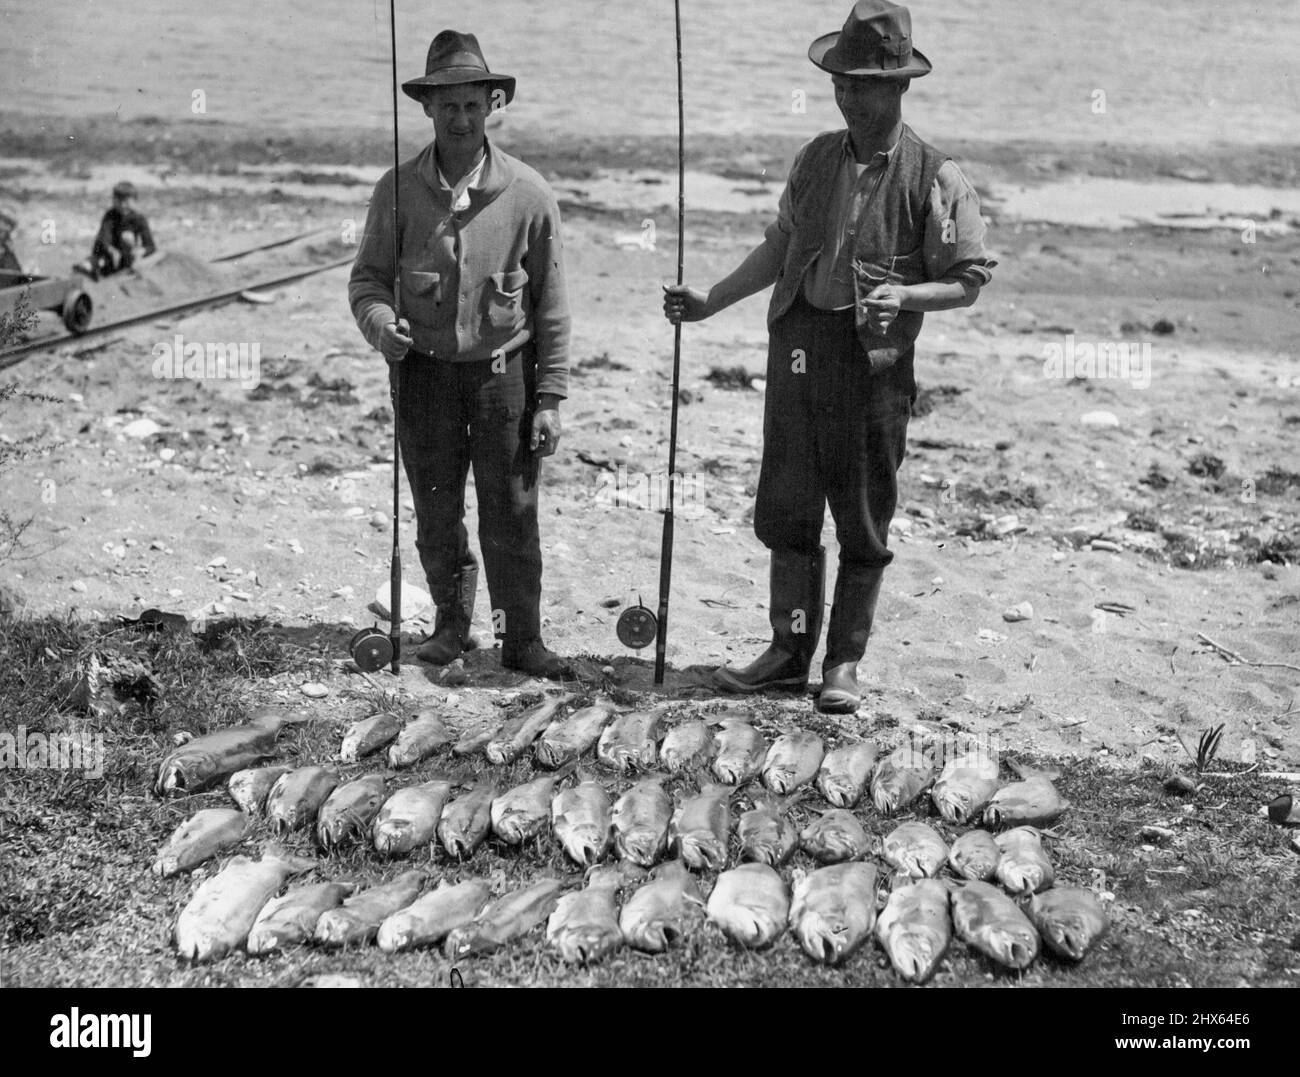 New Zealand's World Famous Trout Fishing. The new trout fishing season opened this week in the North Island of New Zealand. Anglers who were out during the weekend were very pleased with the size and condition of the fish. Prospects are described as being superior to those of several previous years. This photo was taken in the Taupo district. March 14, 1949. Stock Photo